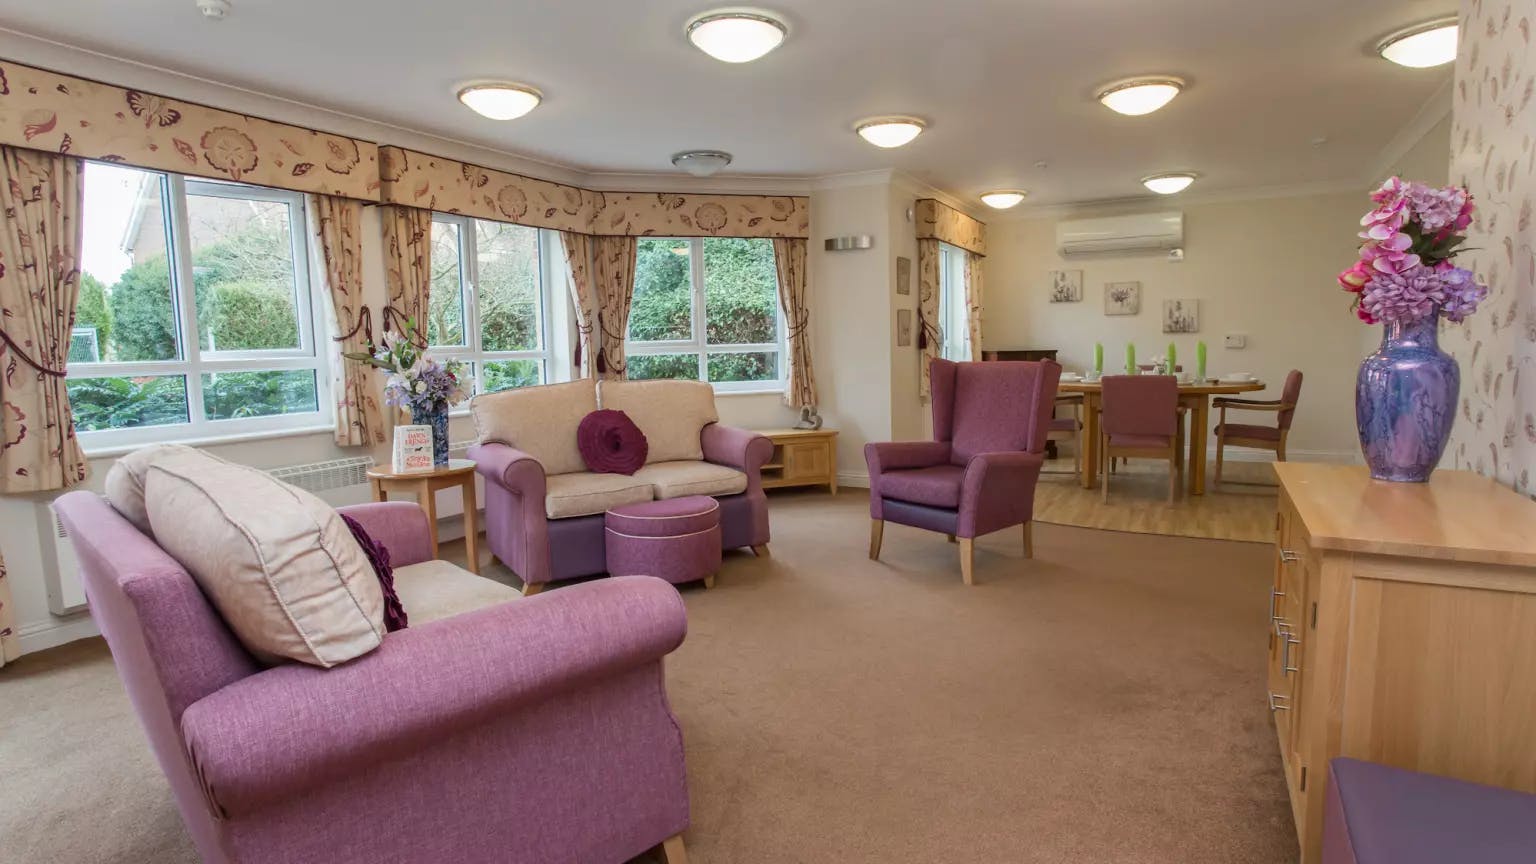 Lounge of Willow Court care home in Harpenden, Hertfordshire